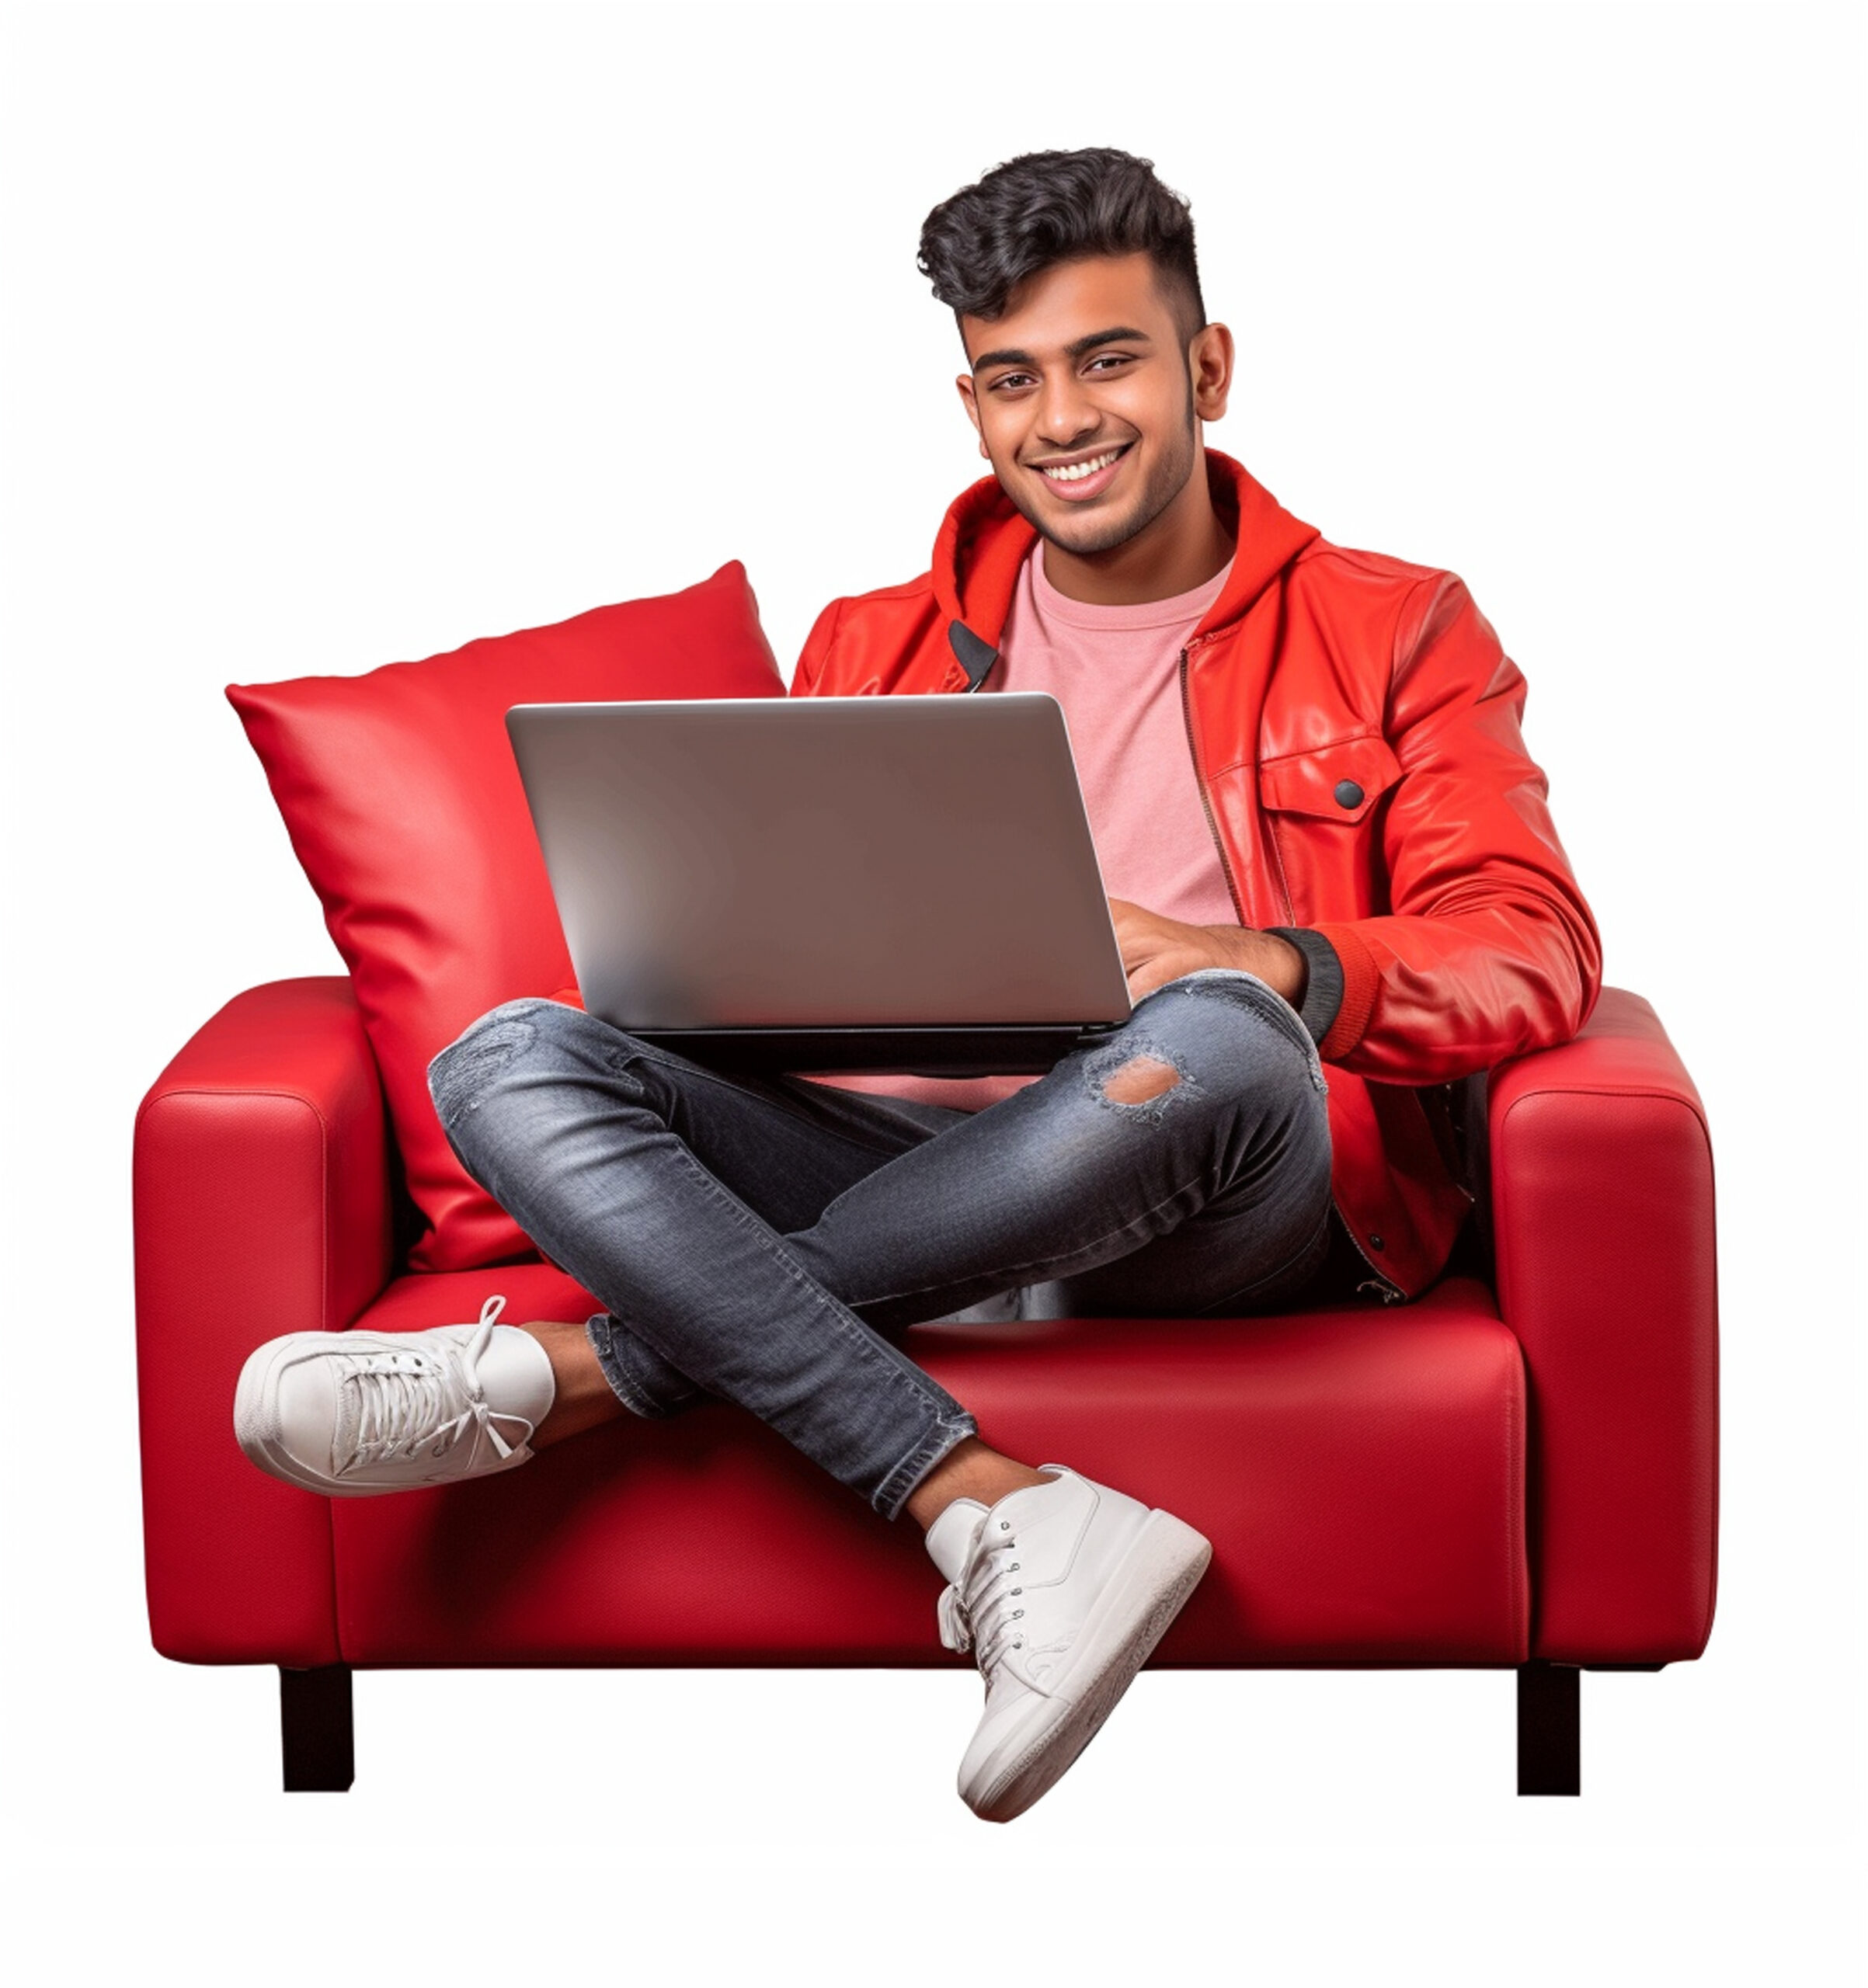 vecteezy_happy young indian male working on a laptop sitting photo ai_24897600 scaled